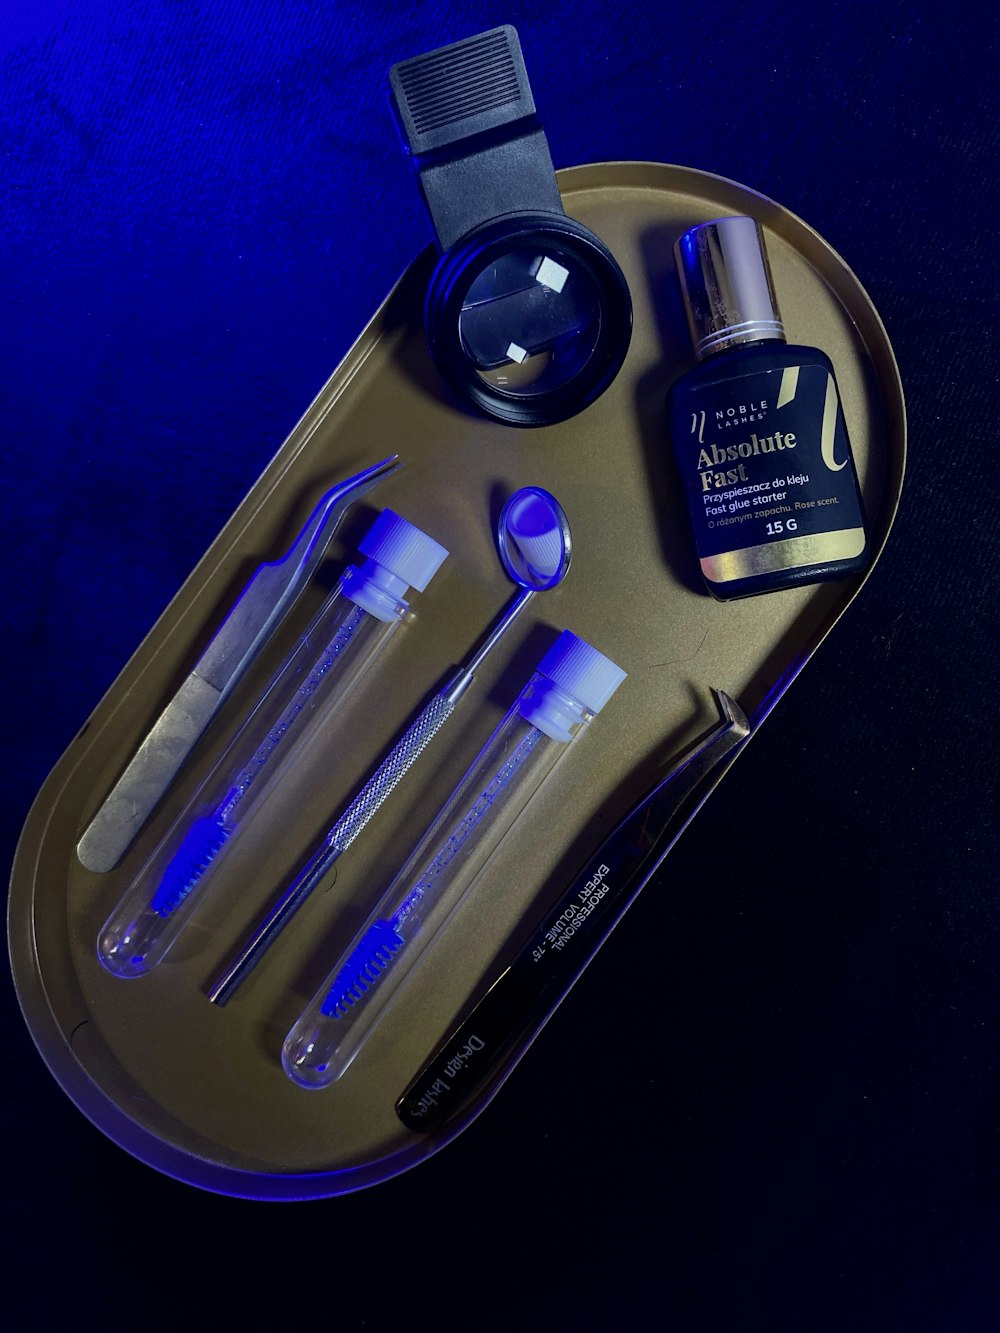 a tray with a bottle, spoons, and other items on it